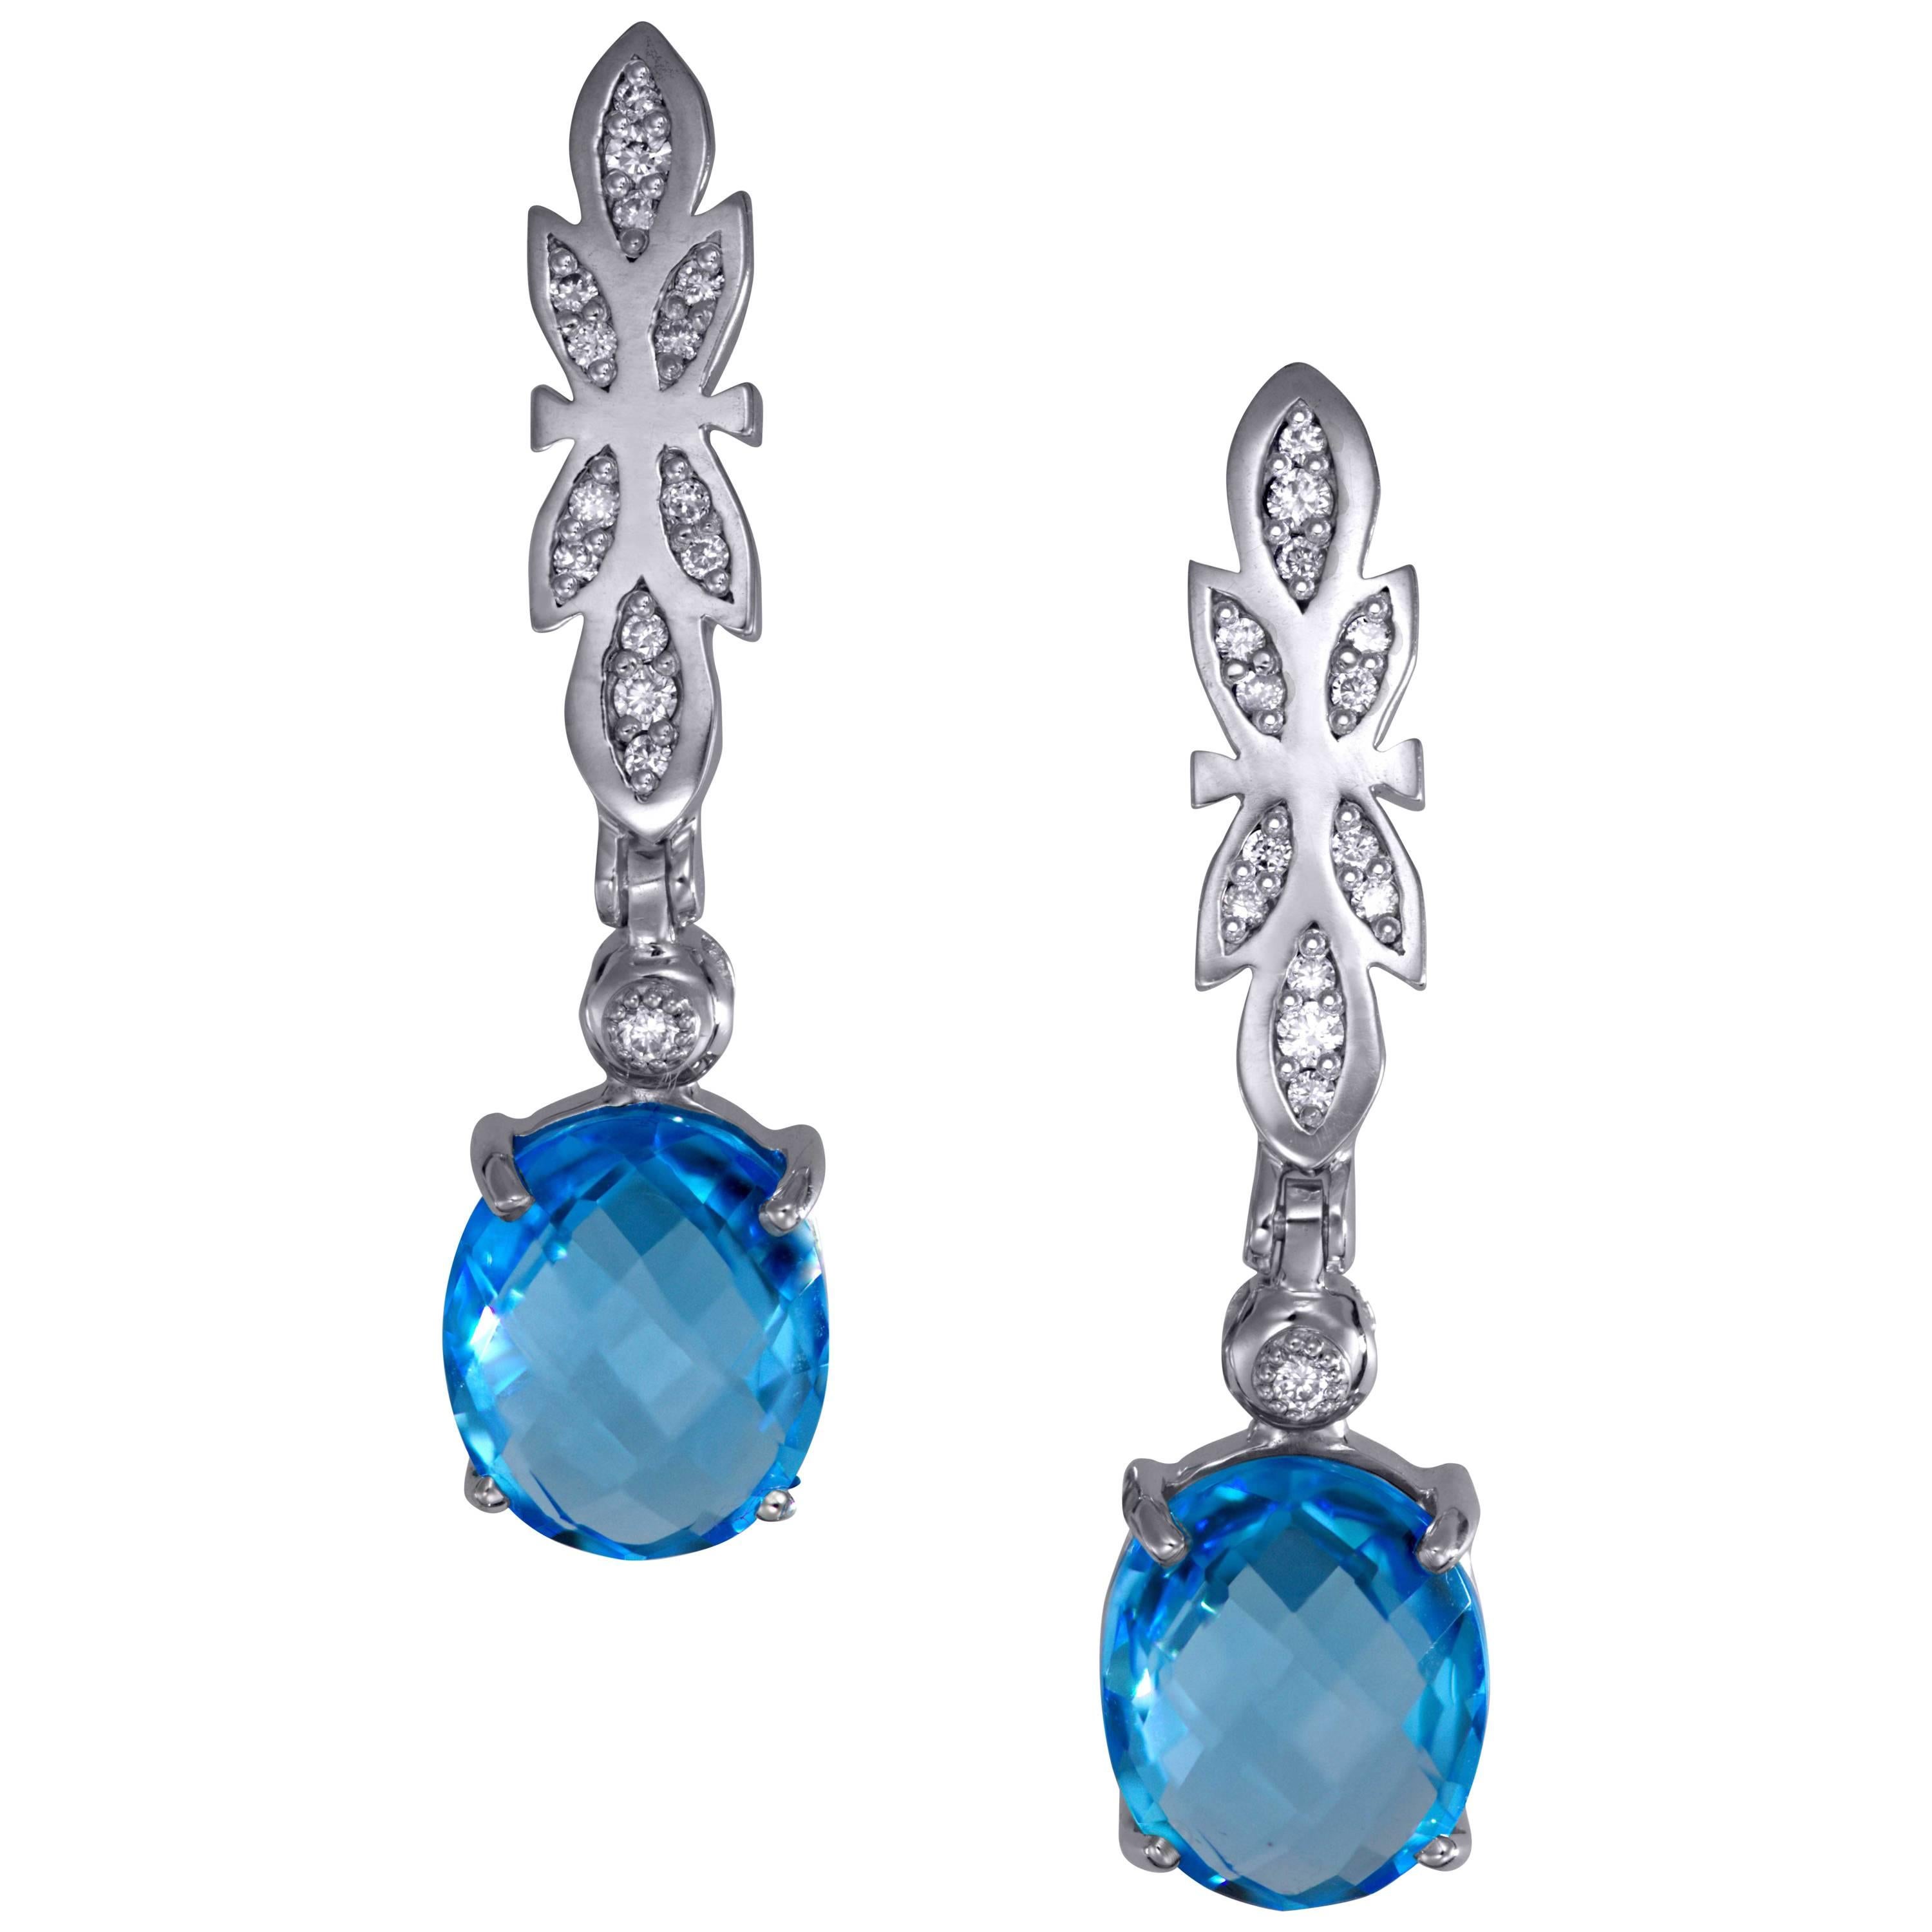 Alex Soldier Blue Topaz Diamond White Gold Drop Earrings One of a kind